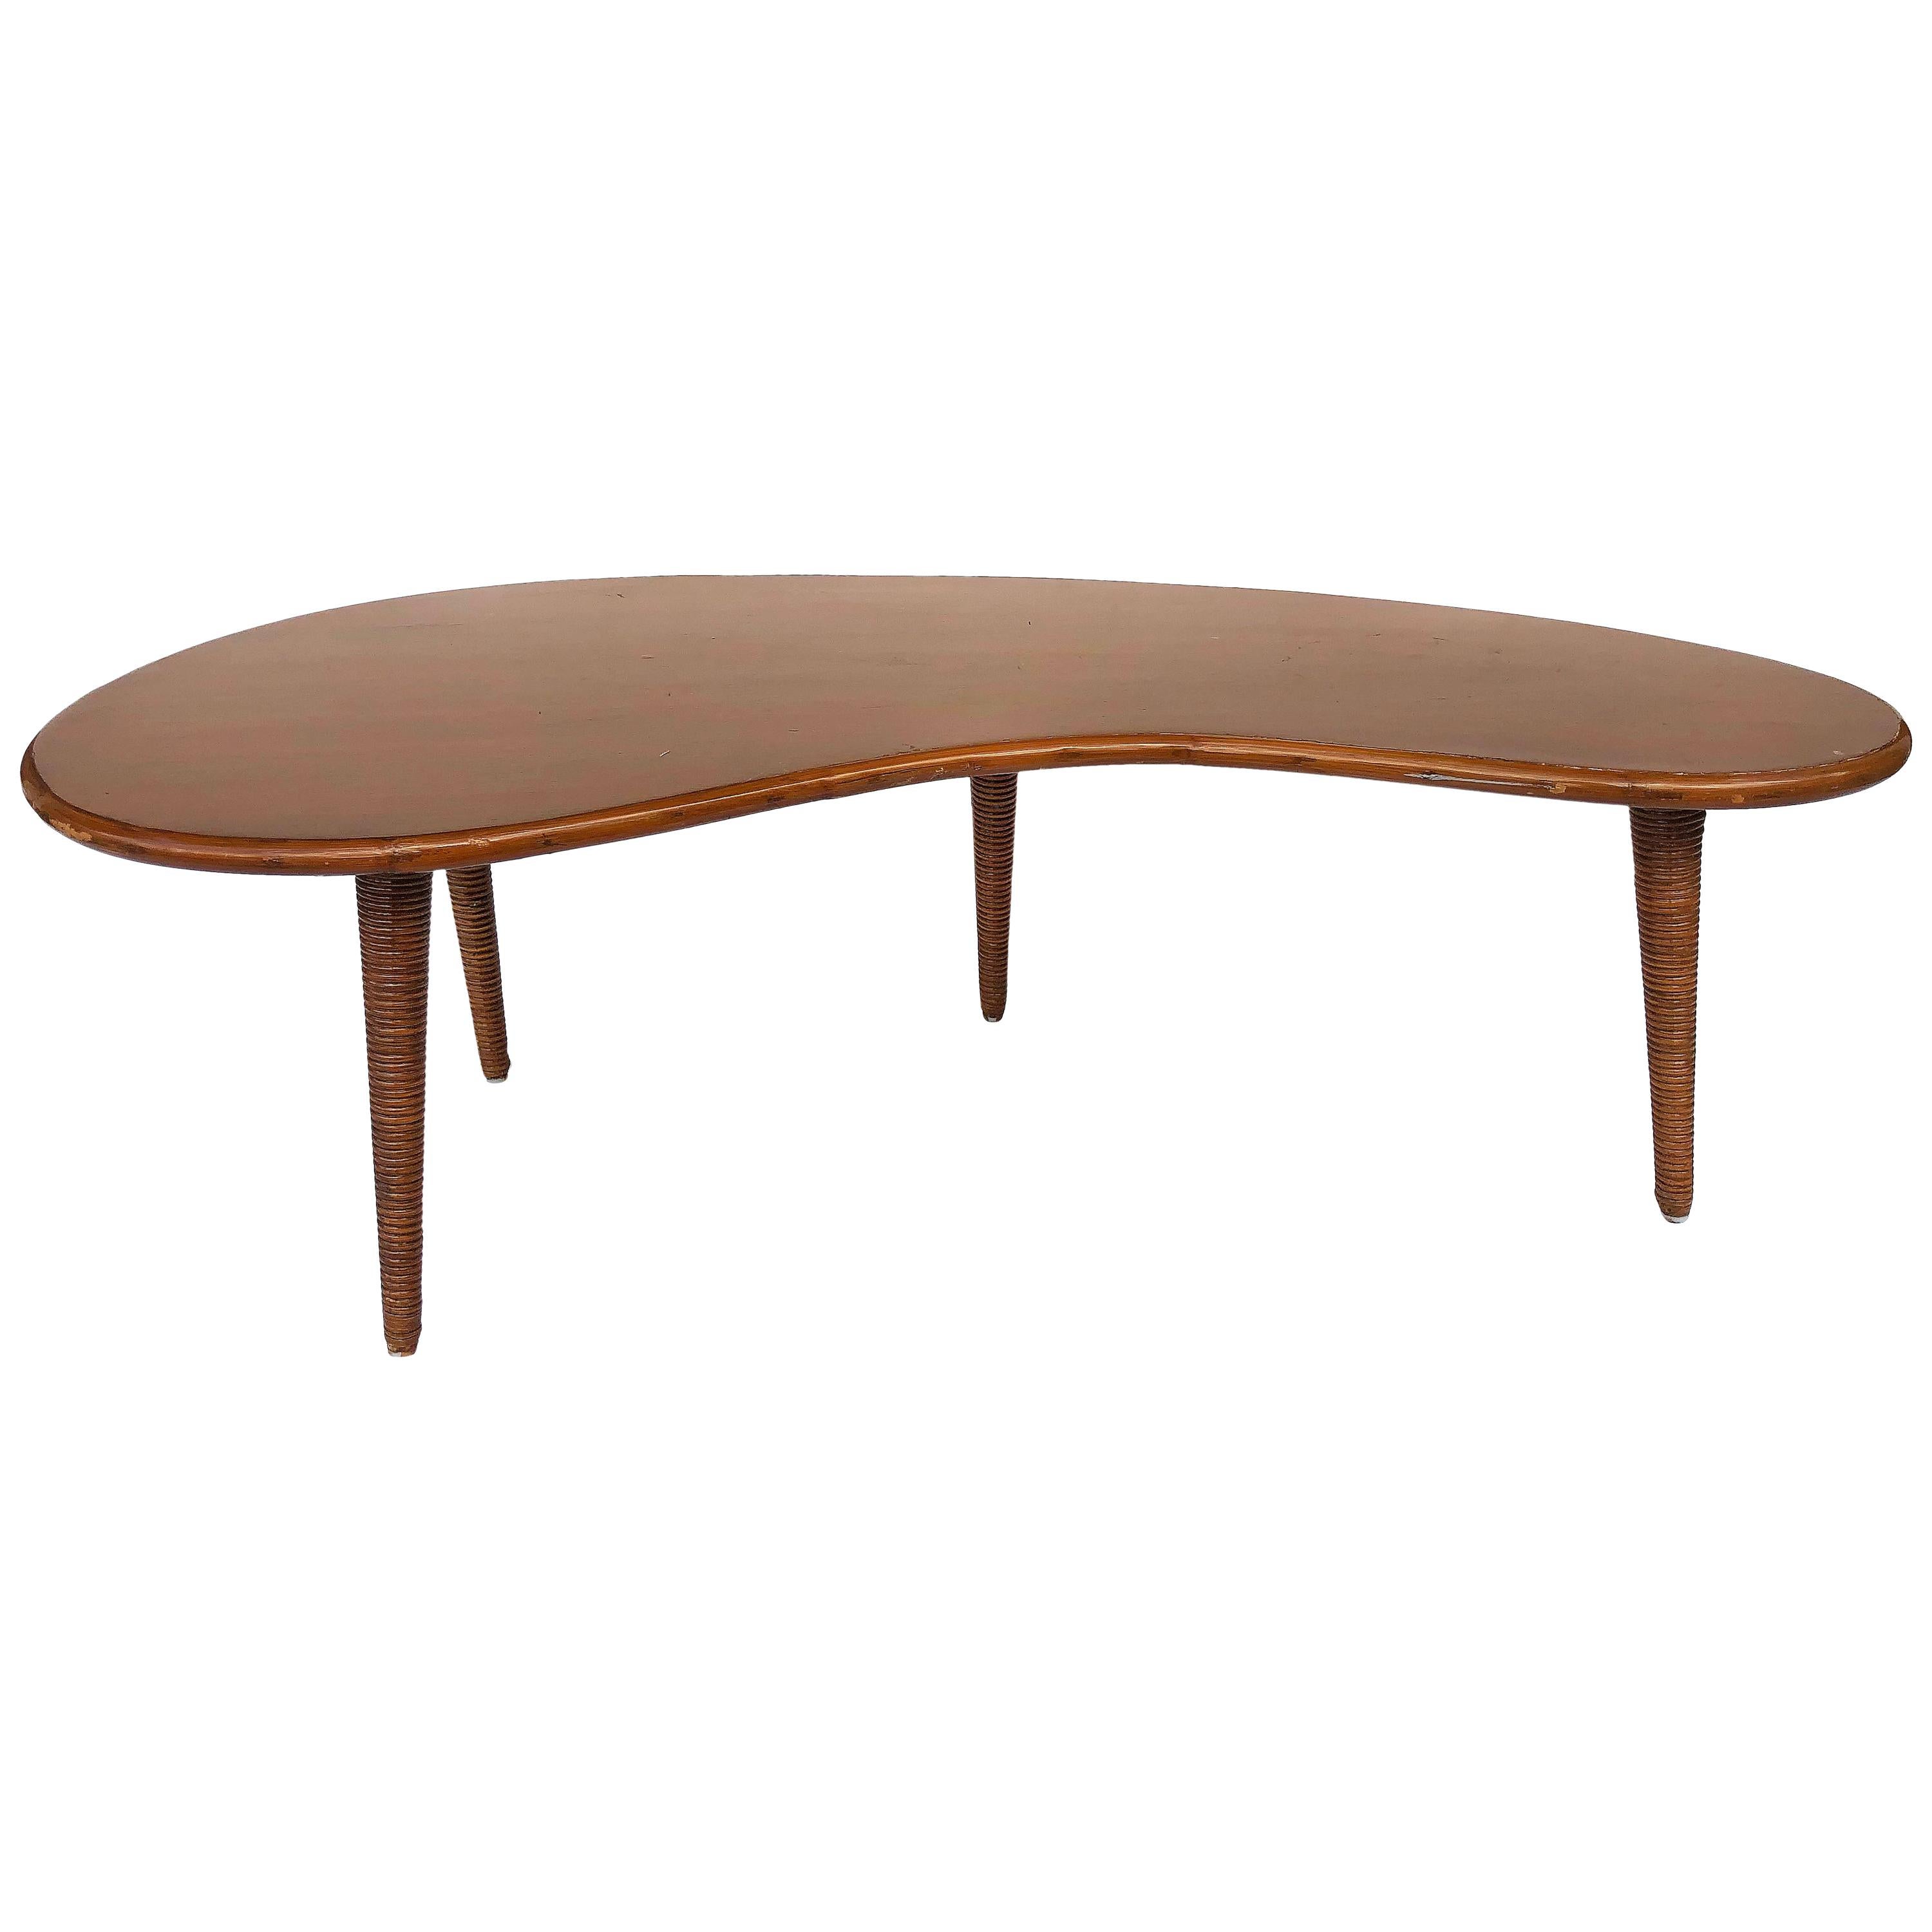 Mid-Century Modern Biomorphic Form Coffee Table with Tapered Reed Legs